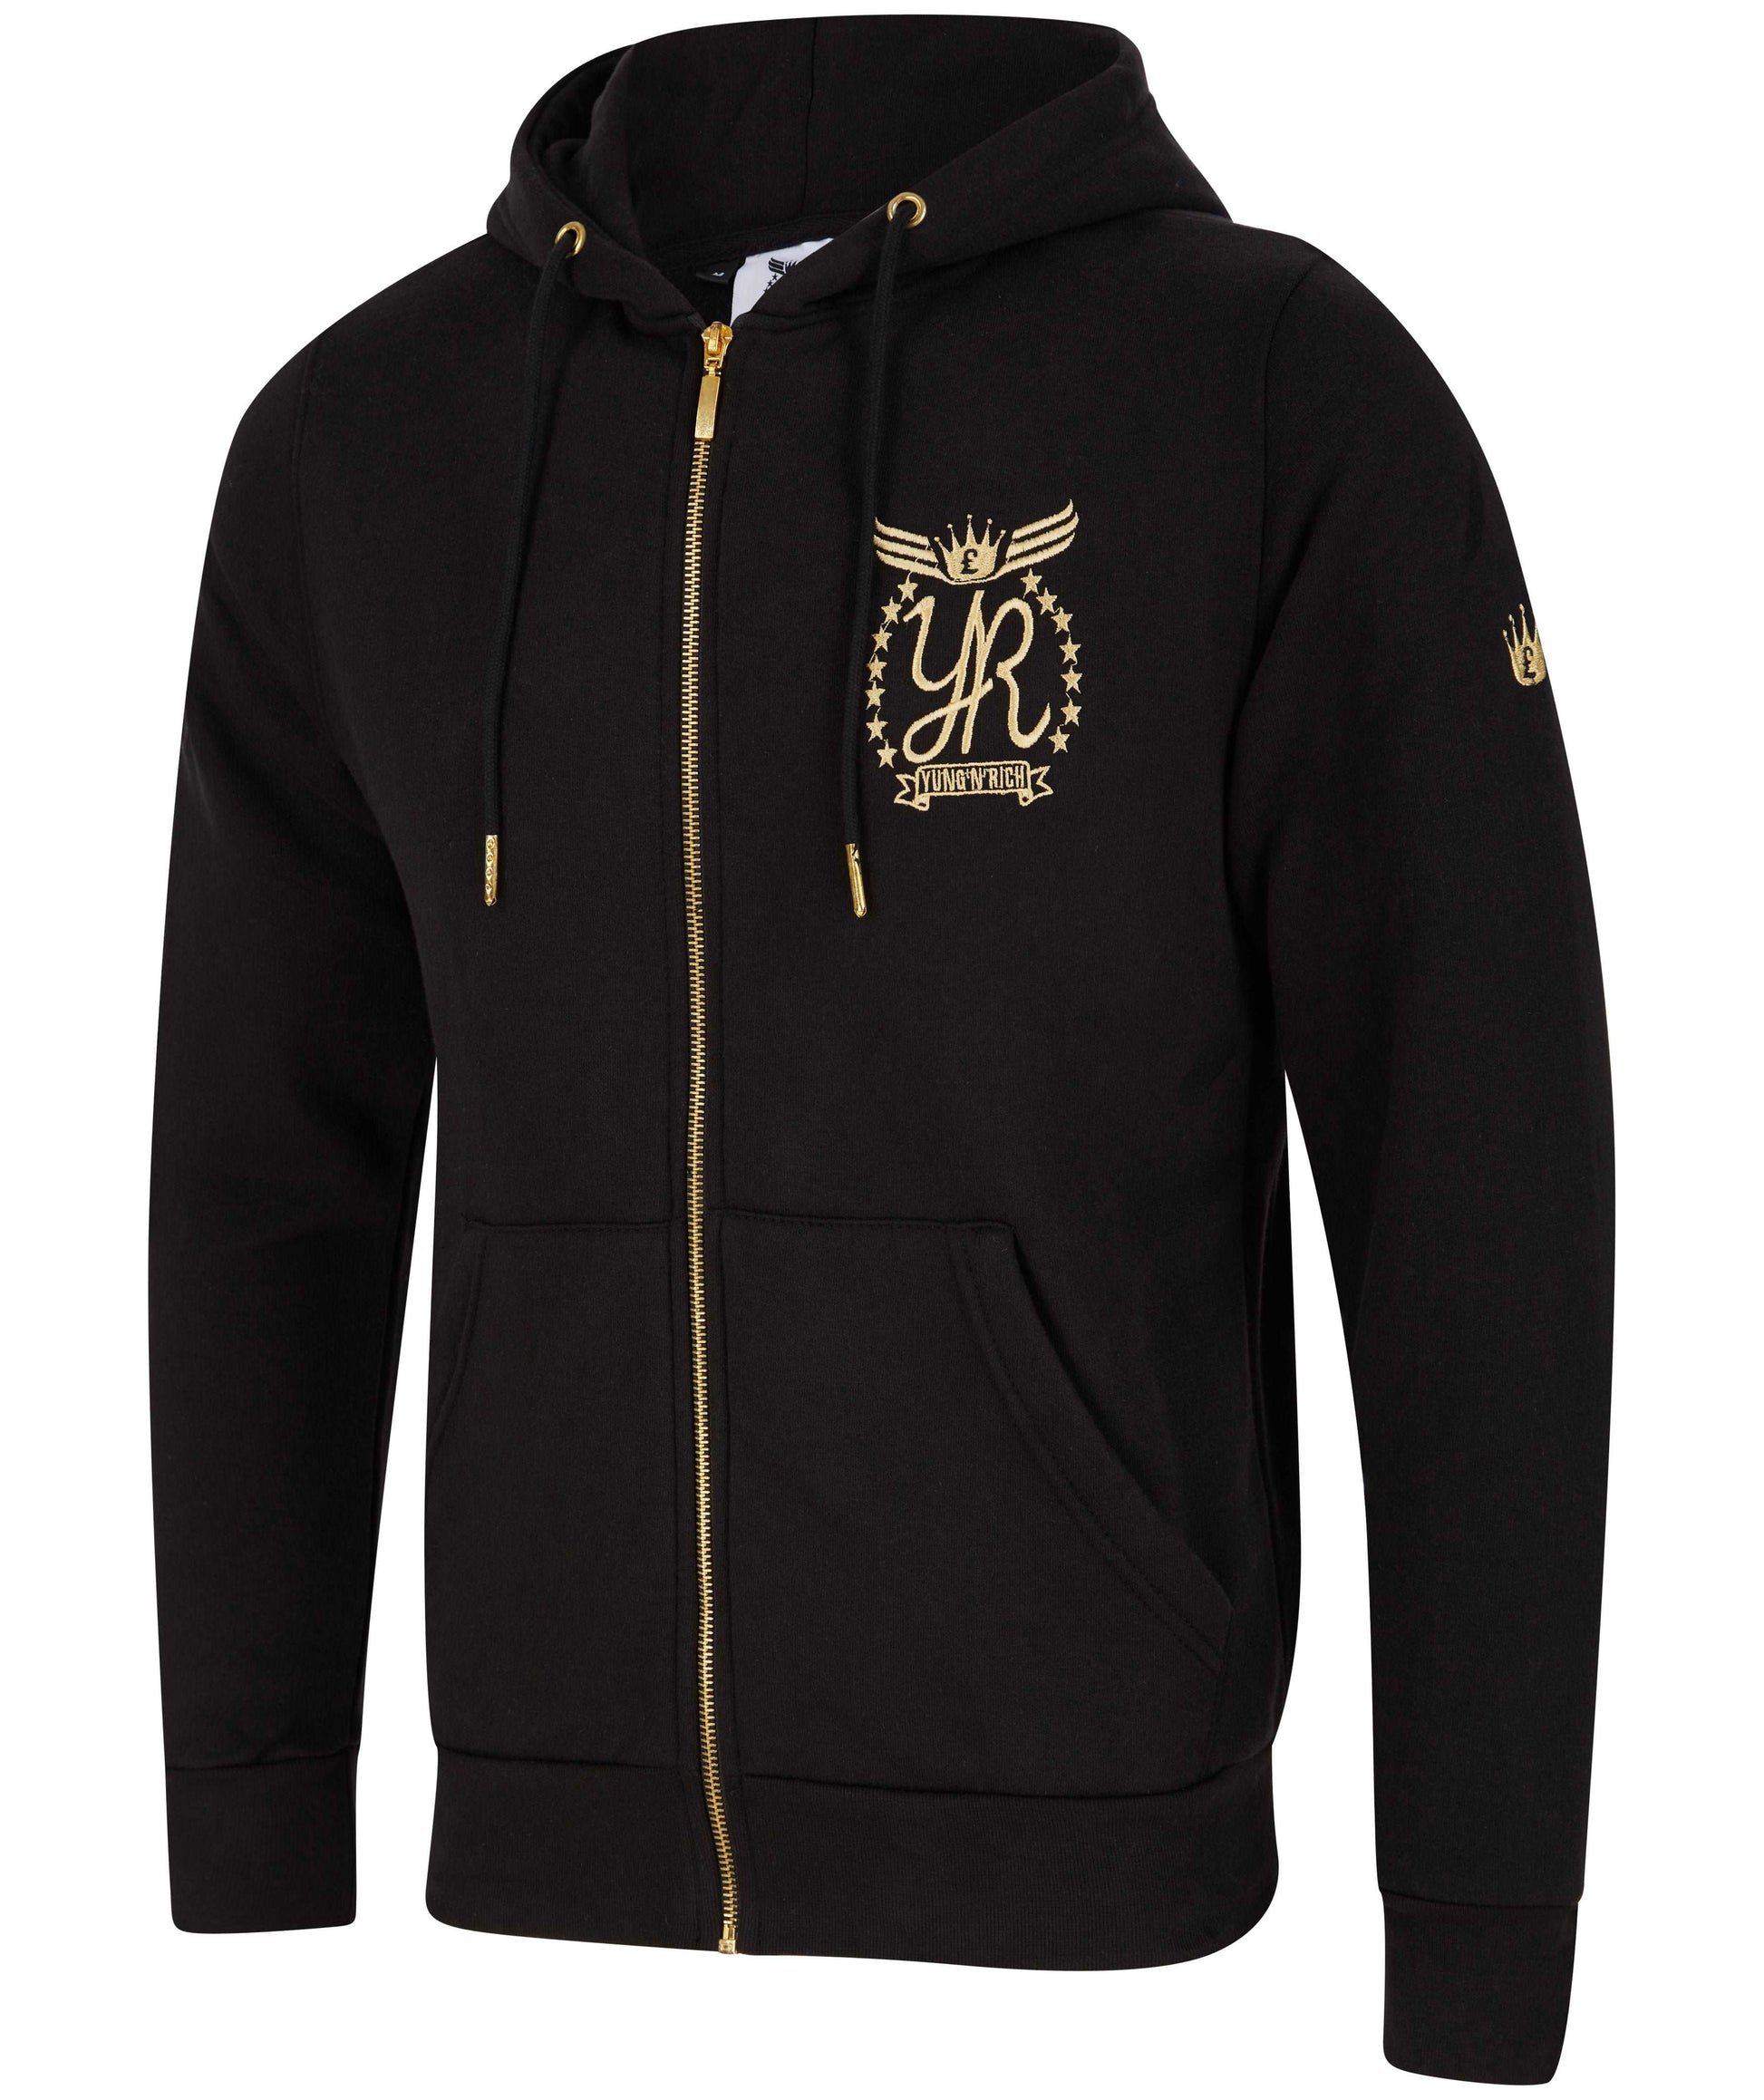 A close-up view of a YUNG'N'RICH black hoodie featuring a gold zip and detailed gold embroidery of the brand's logo on the chest. The logo showcases stylized 'YR' initials, encased within an ornate design with stars, wings, and a crown, representing the brand's fusion of streetwear with regal elements. The hoodie's design is refined yet bold, targeting the upscale urban fashion market.